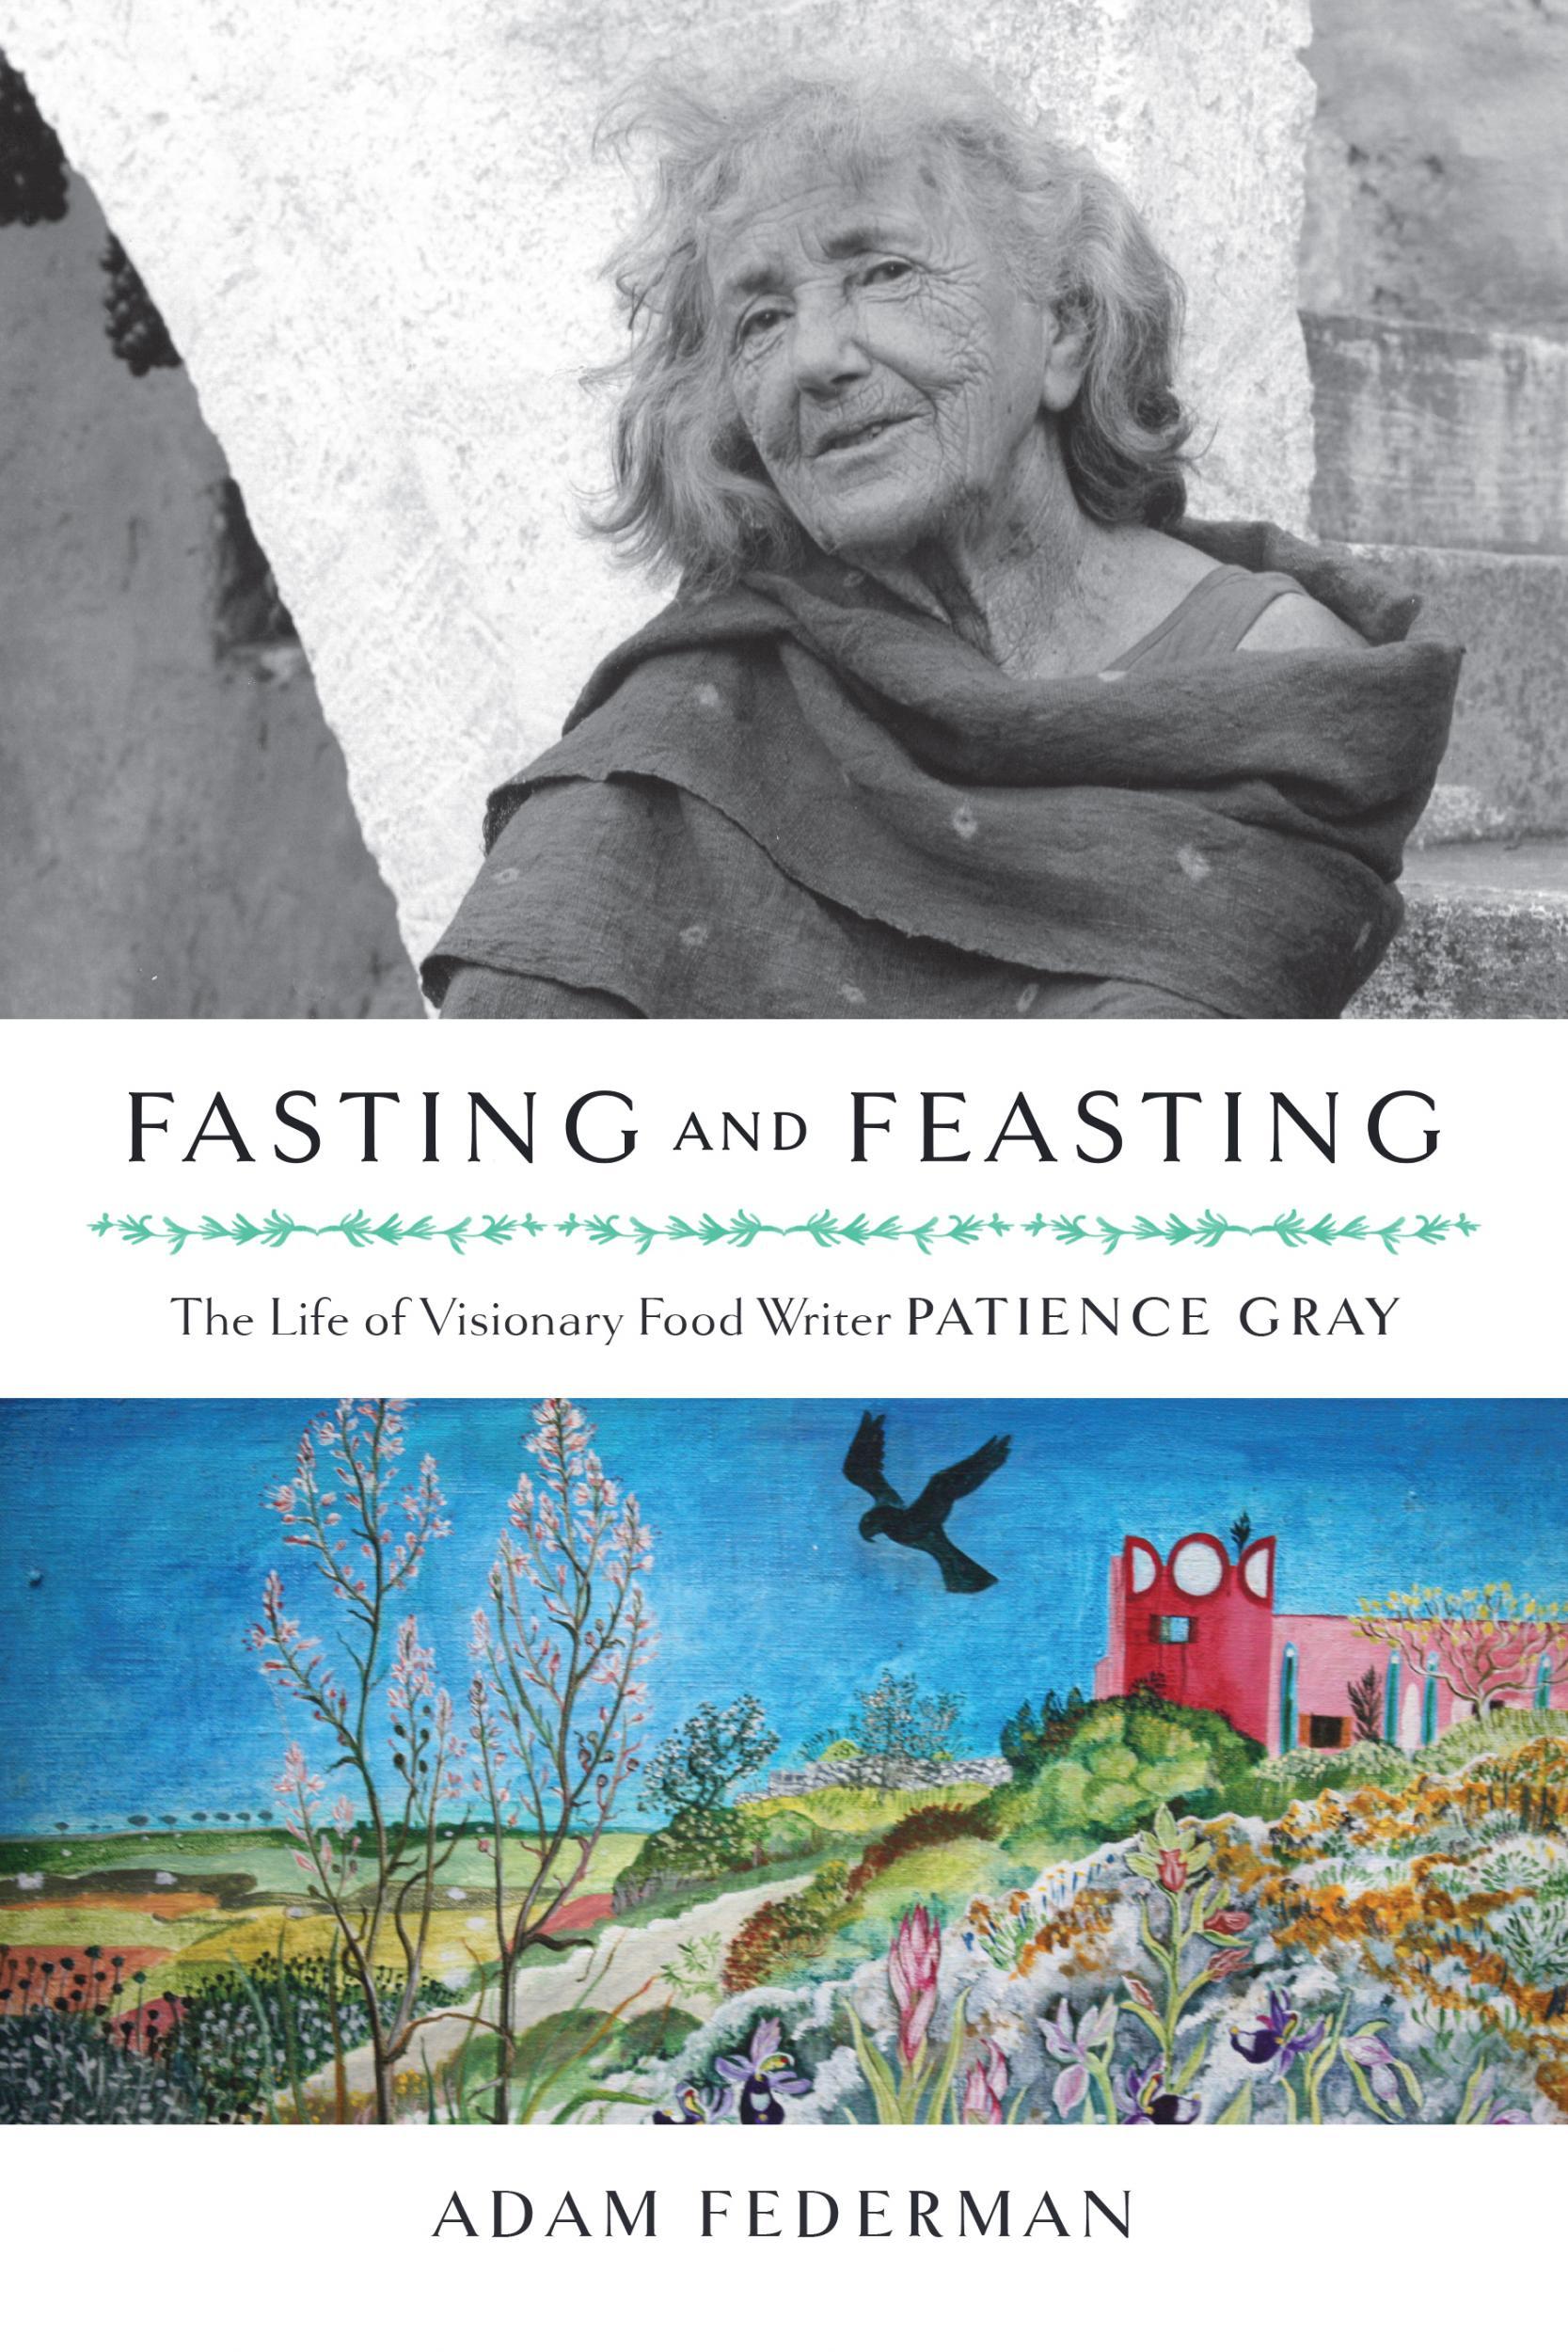 (Fasting and Feasting